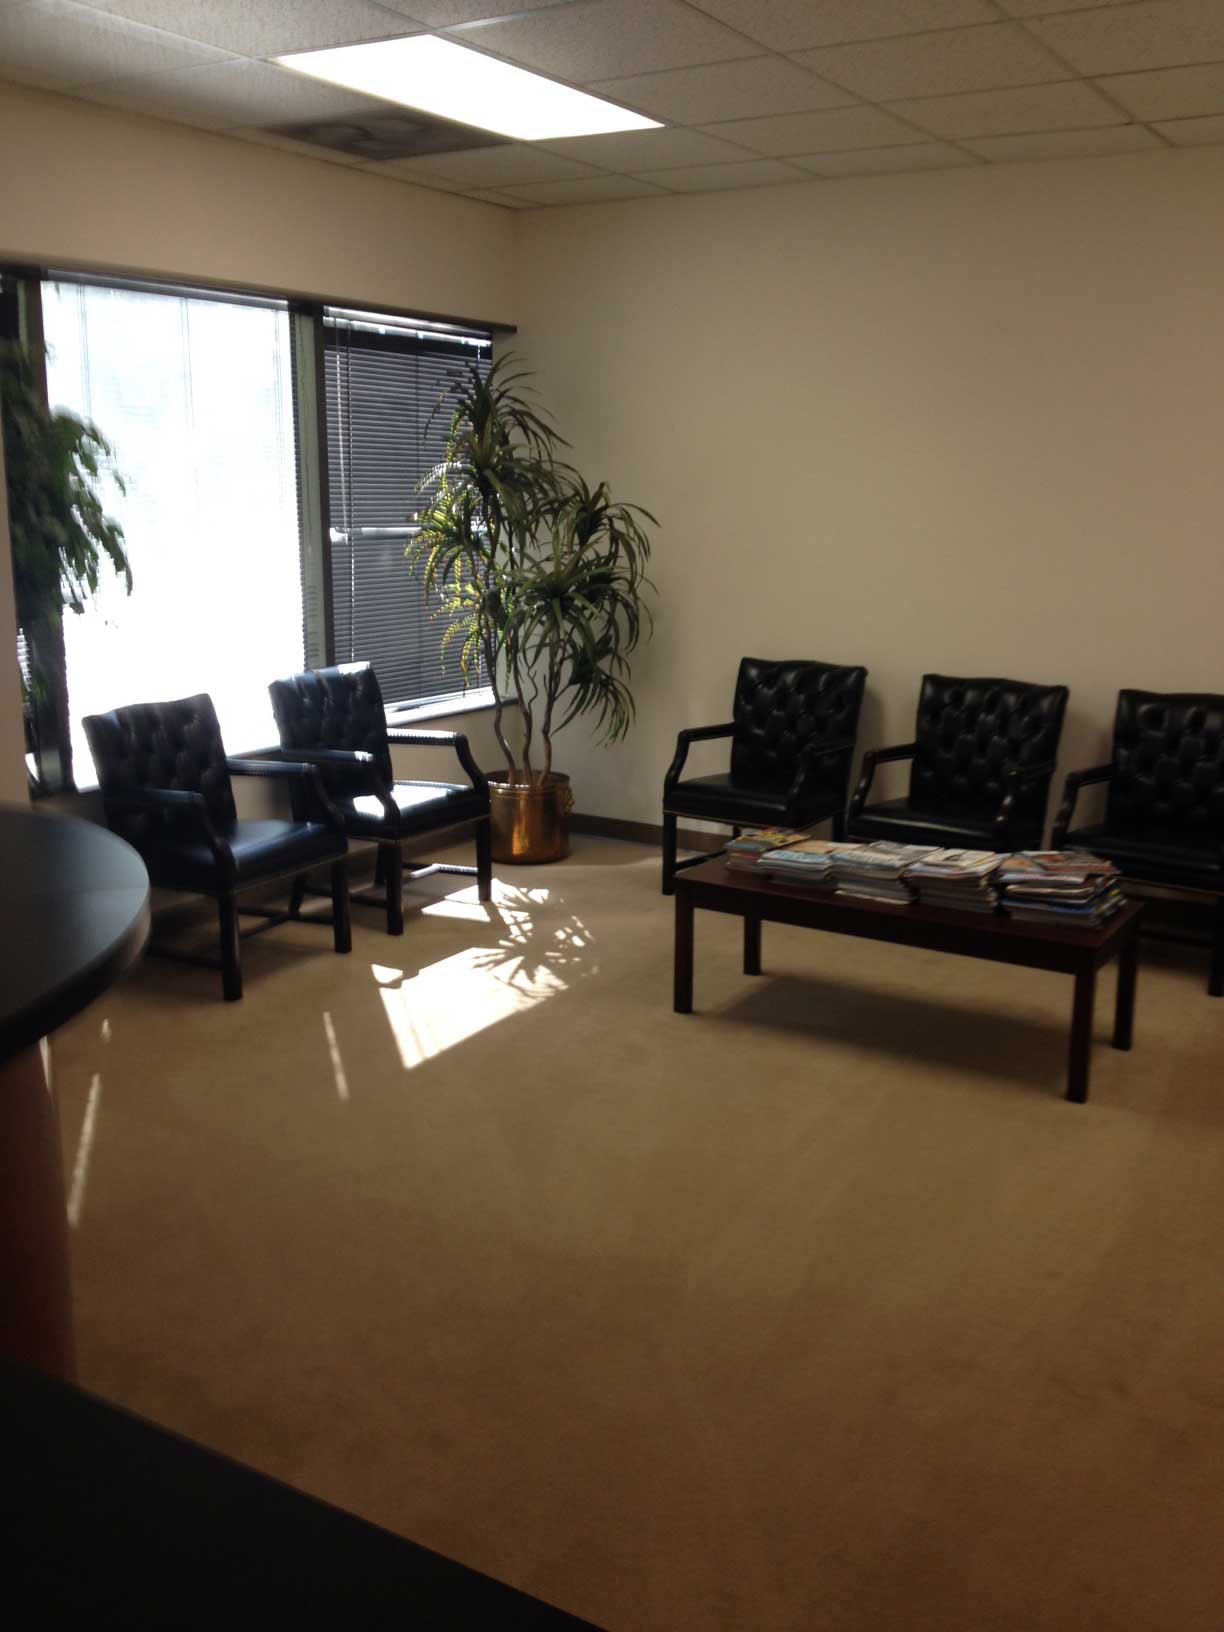 Interior of the Office at Spencer & Associates